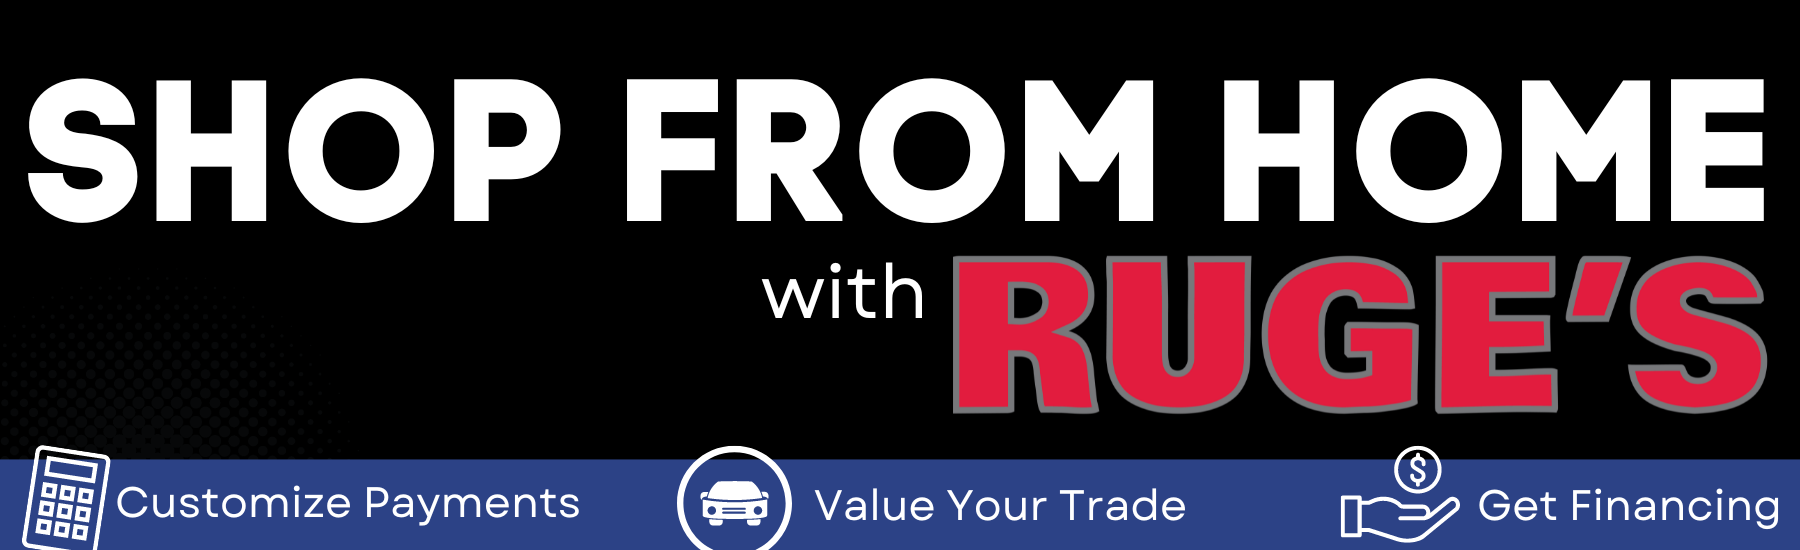 Shop From Home with Ruge's Ford